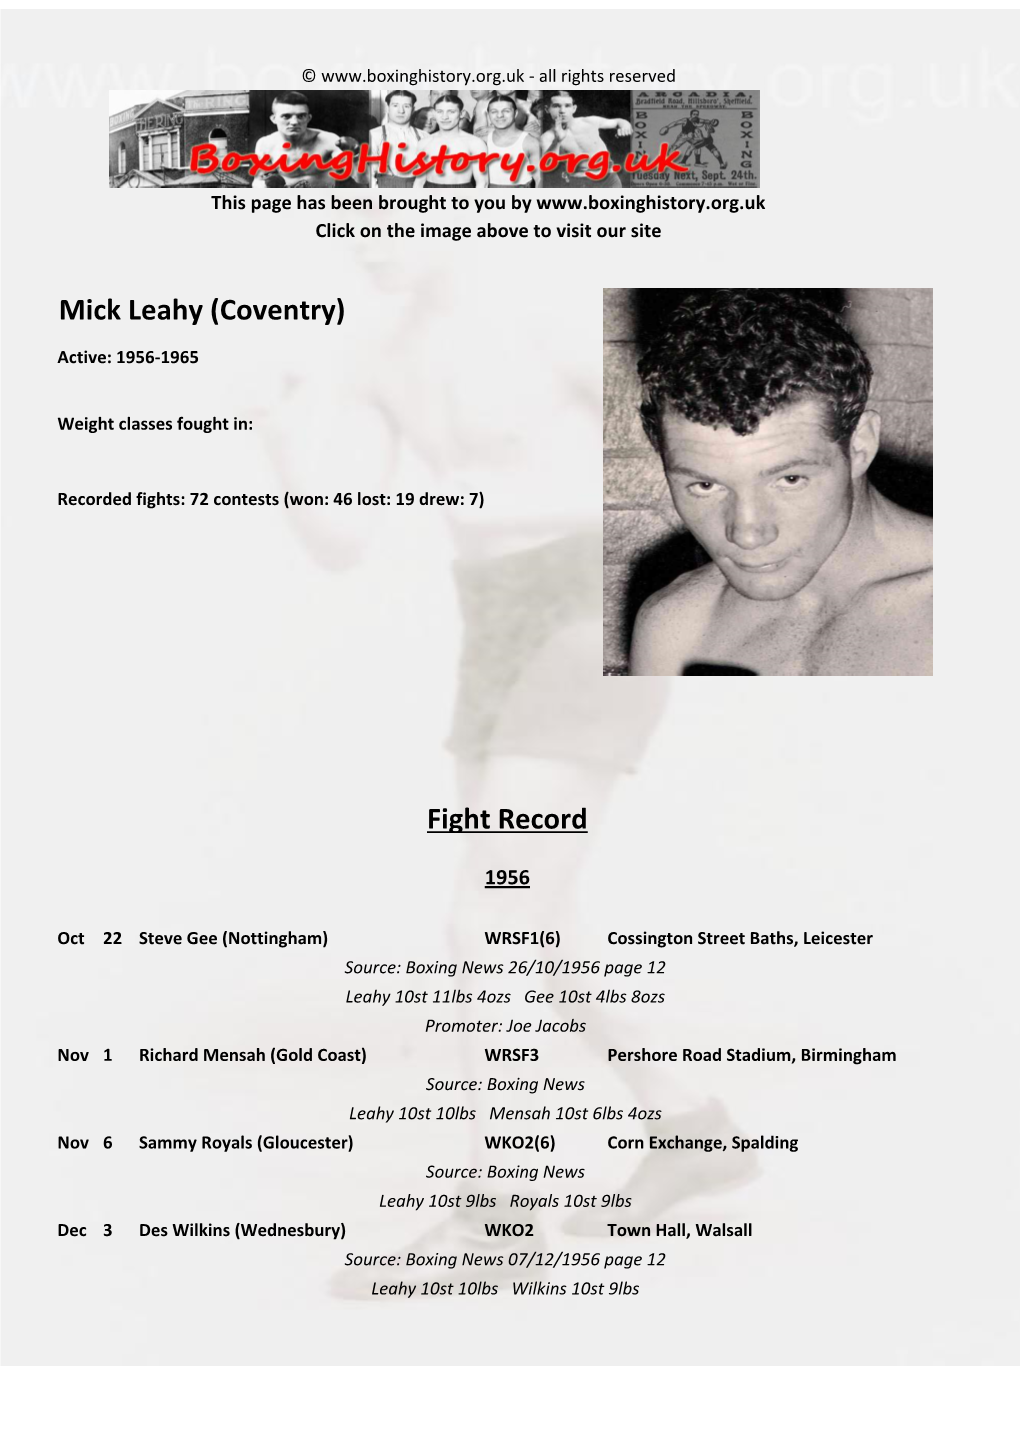 Fight Record Mick Leahy (Coventry)